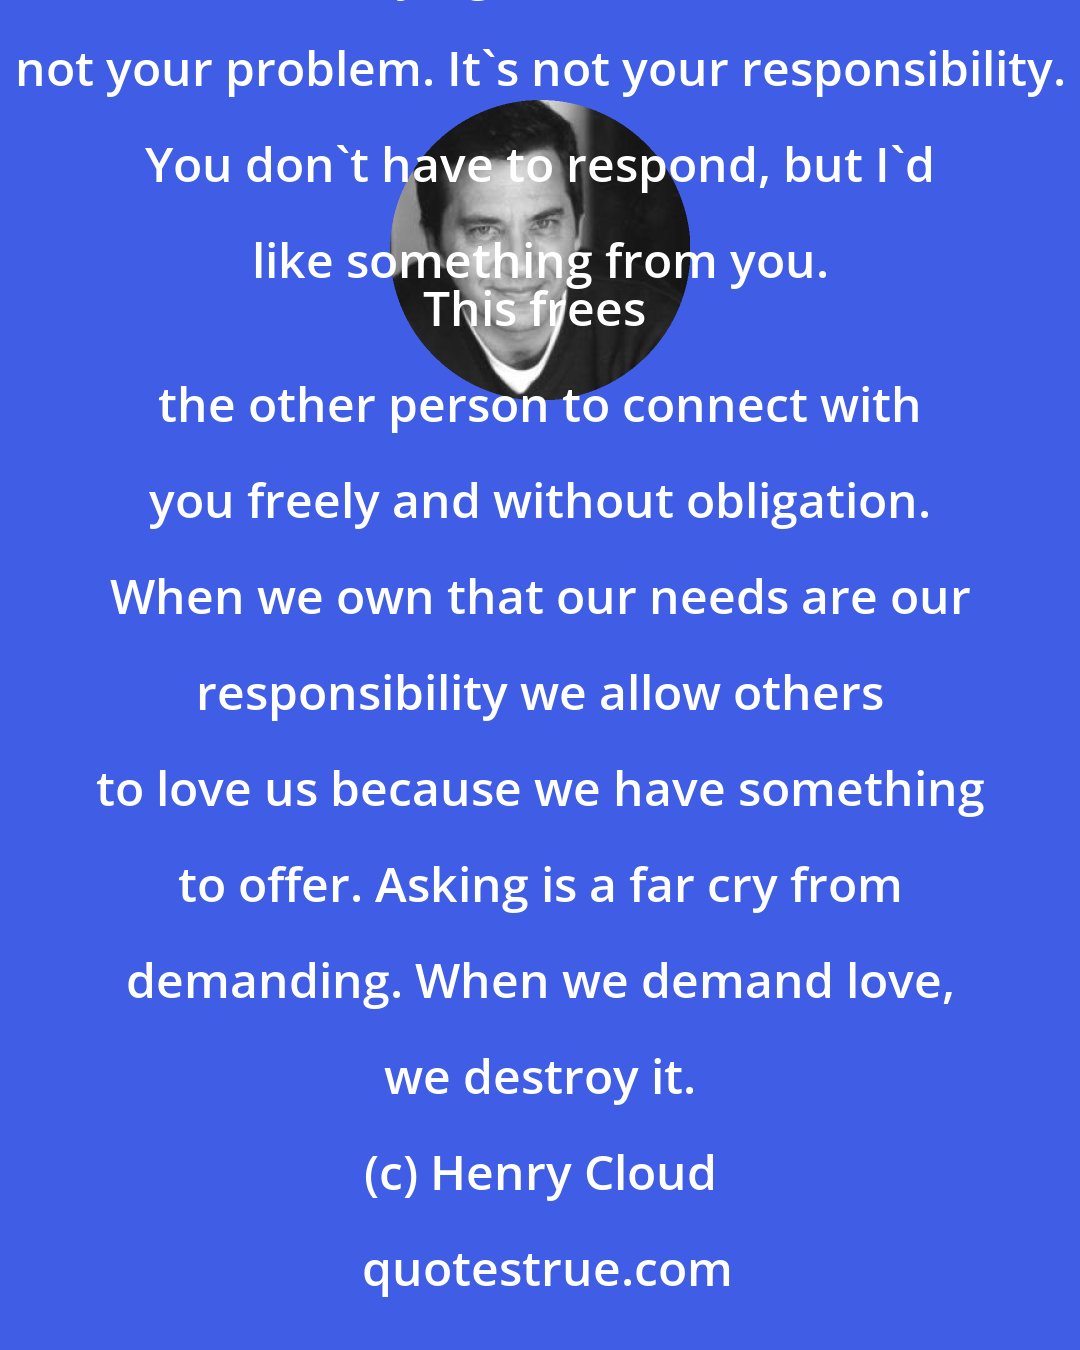 Henry Cloud: When we ask we are owning our needs. Asking for love, comfort or understanding is a transaction between two people. You are saying: I have a need. It's not your problem. It's not your responsibility. You don't have to respond, but I'd like something from you. 
This frees the other person to connect with you freely and without obligation. When we own that our needs are our responsibility we allow others to love us because we have something to offer. Asking is a far cry from demanding. When we demand love, we destroy it.